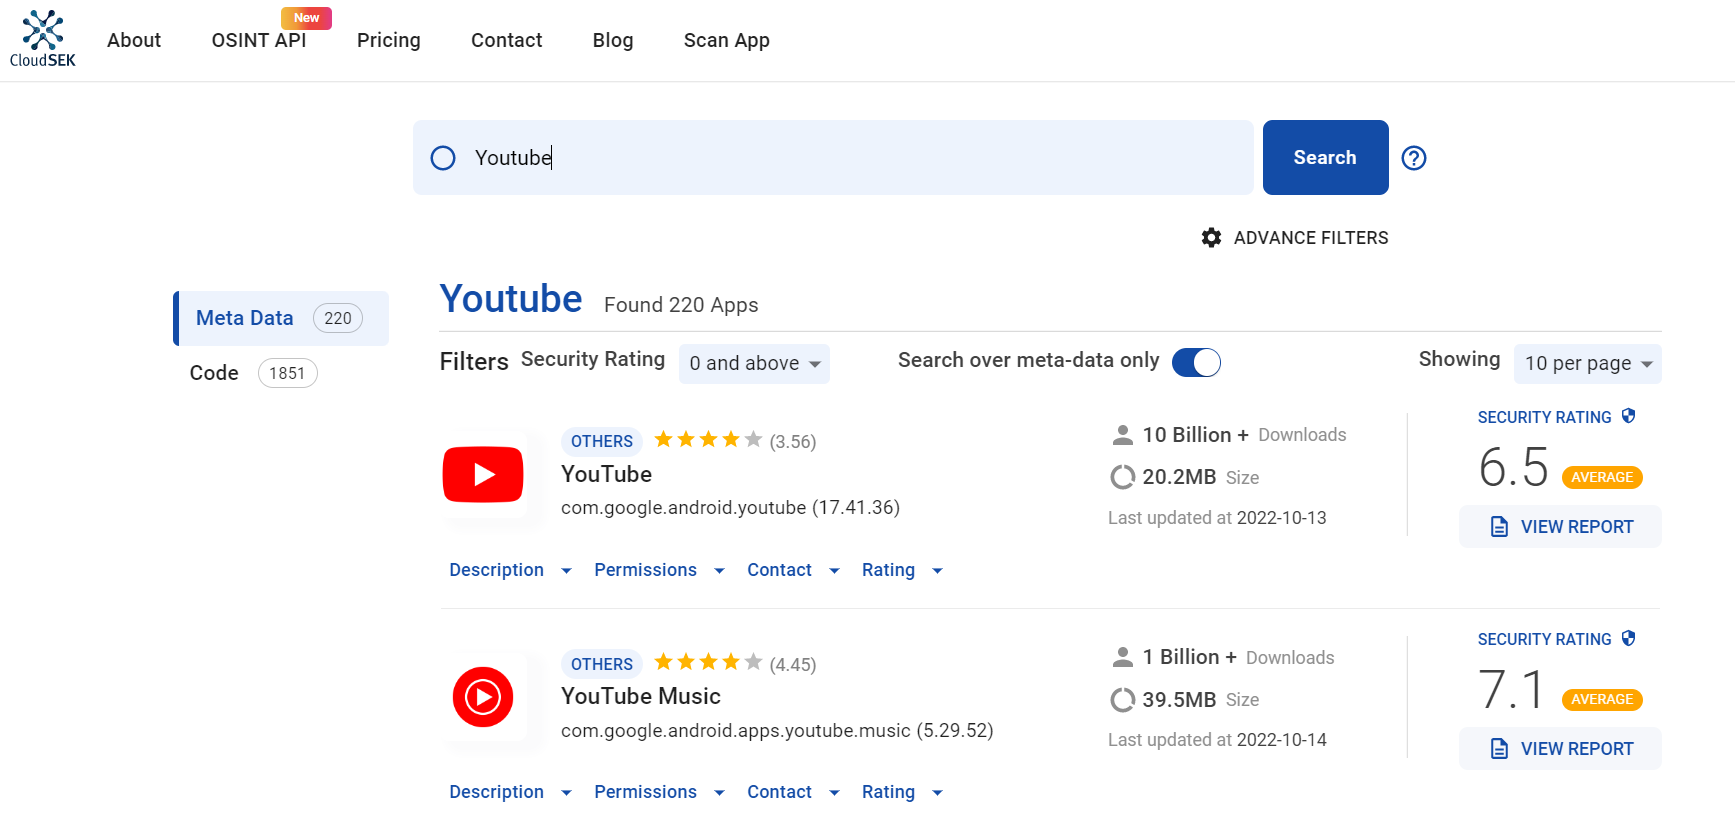 Application search results for the keyword “Youtube” on BeVigil